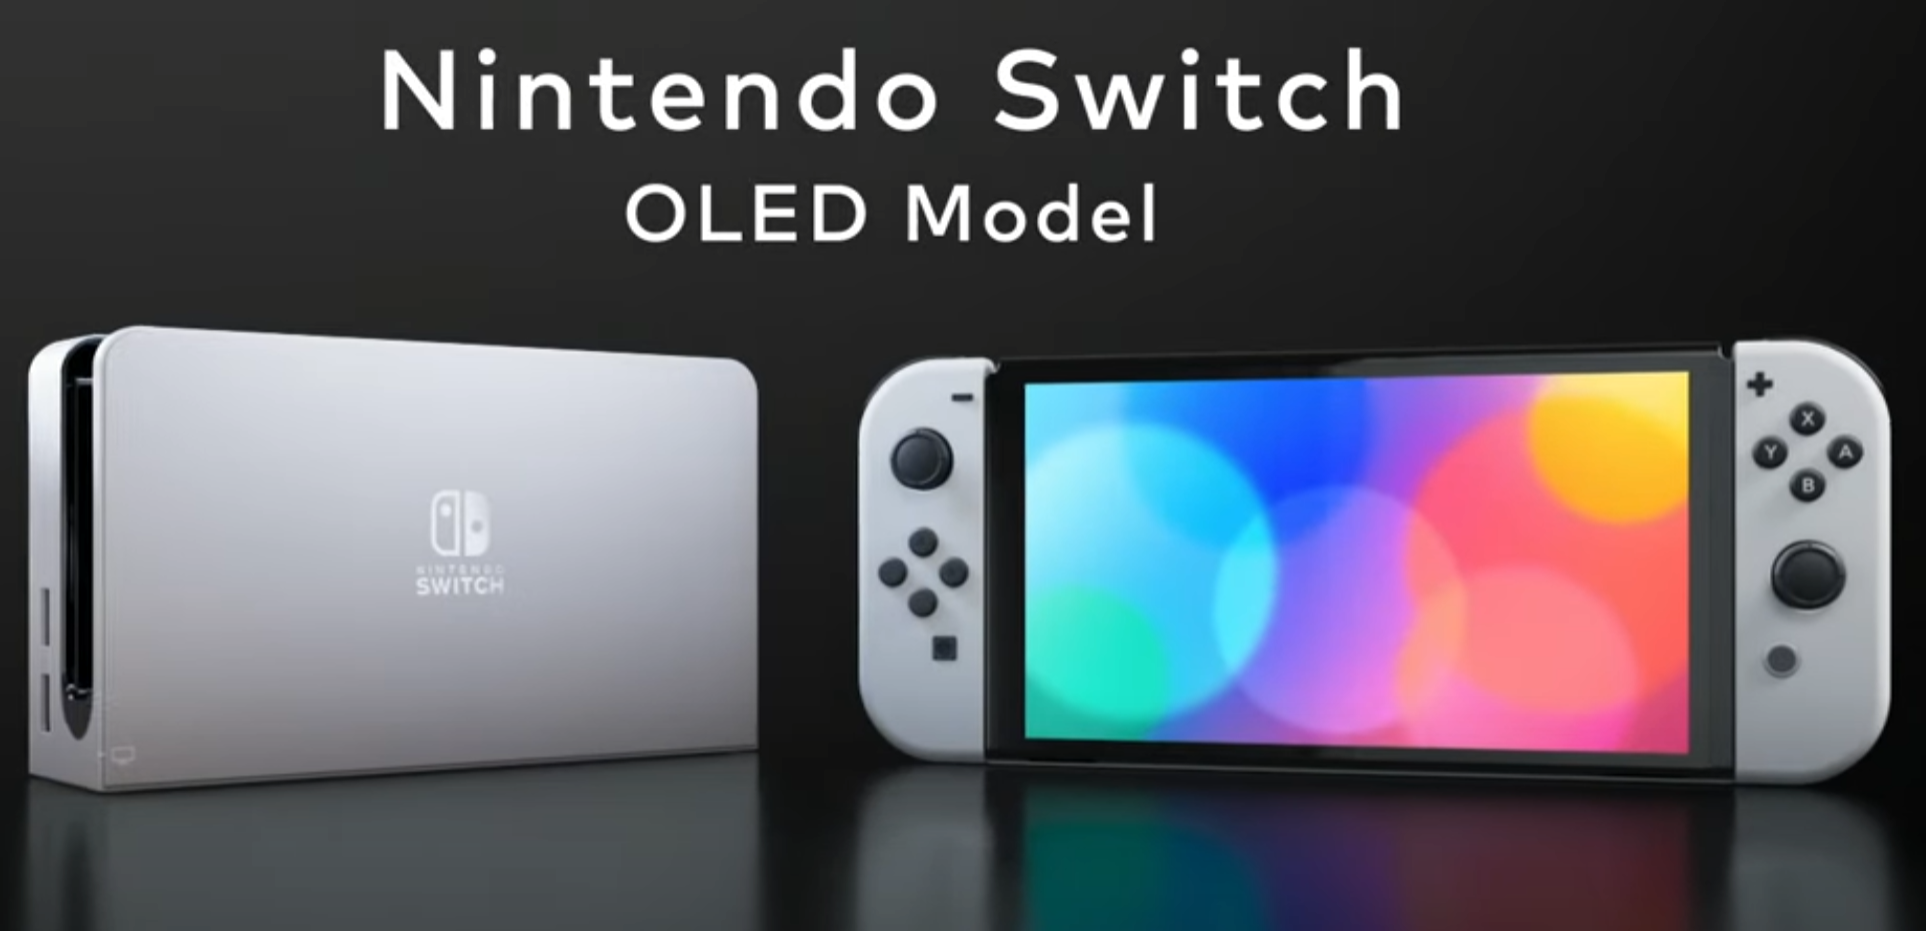 Nintendo Officially Reveals Nintendo Switch (OLED Model)